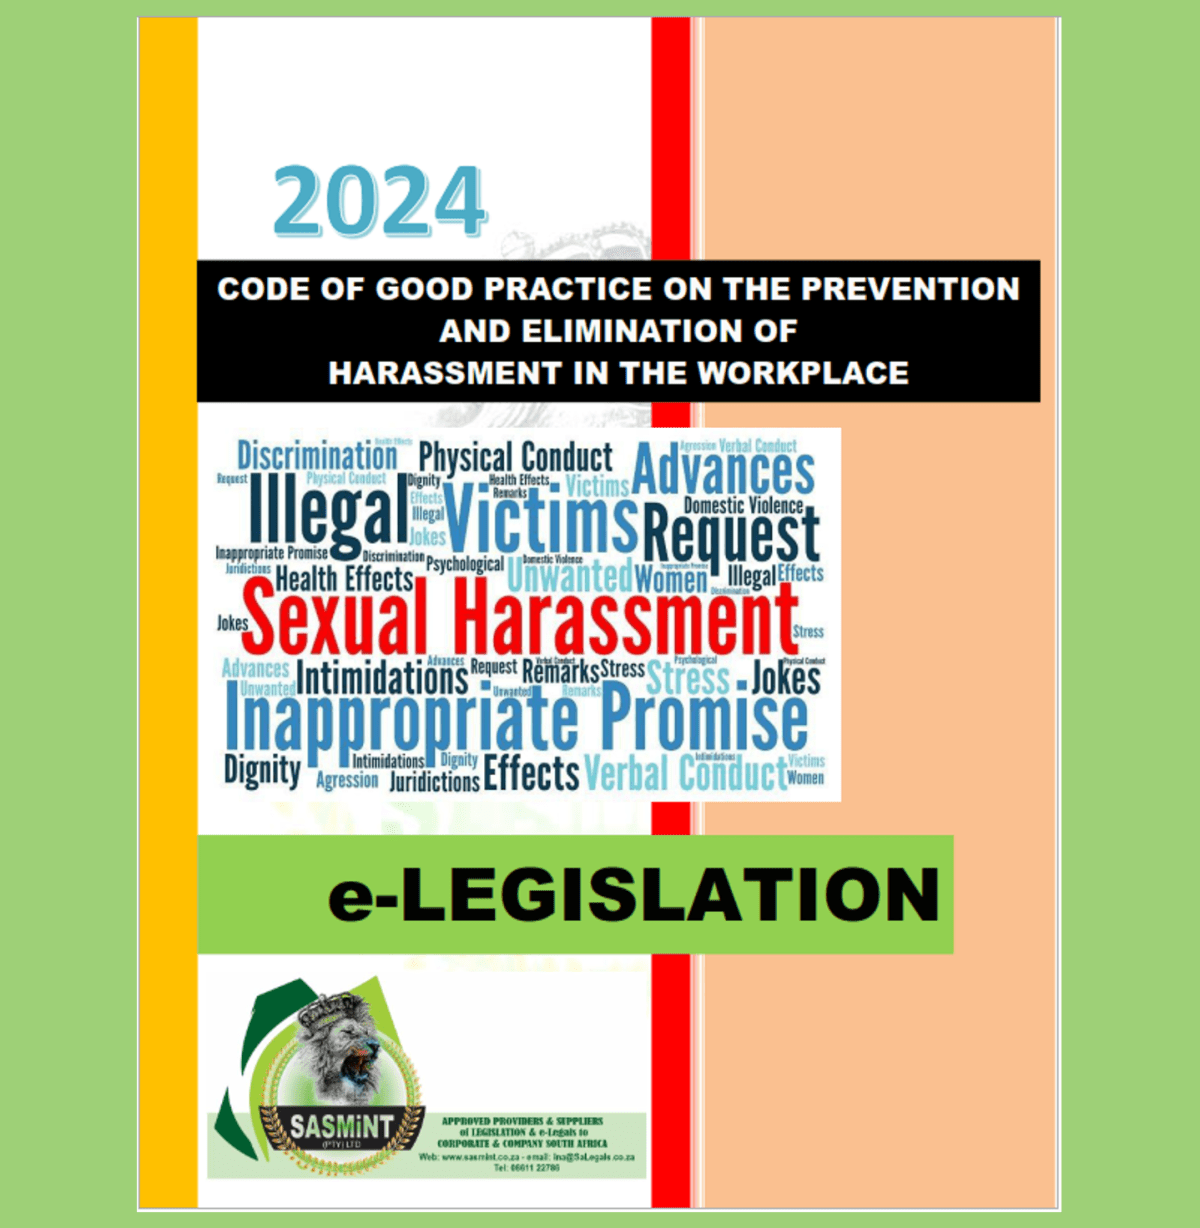 CODE OF GOOD PRACTICE ON THE PREVENTION AND ELIMINATION OF HARASSMENT IN THE WORKPLACE